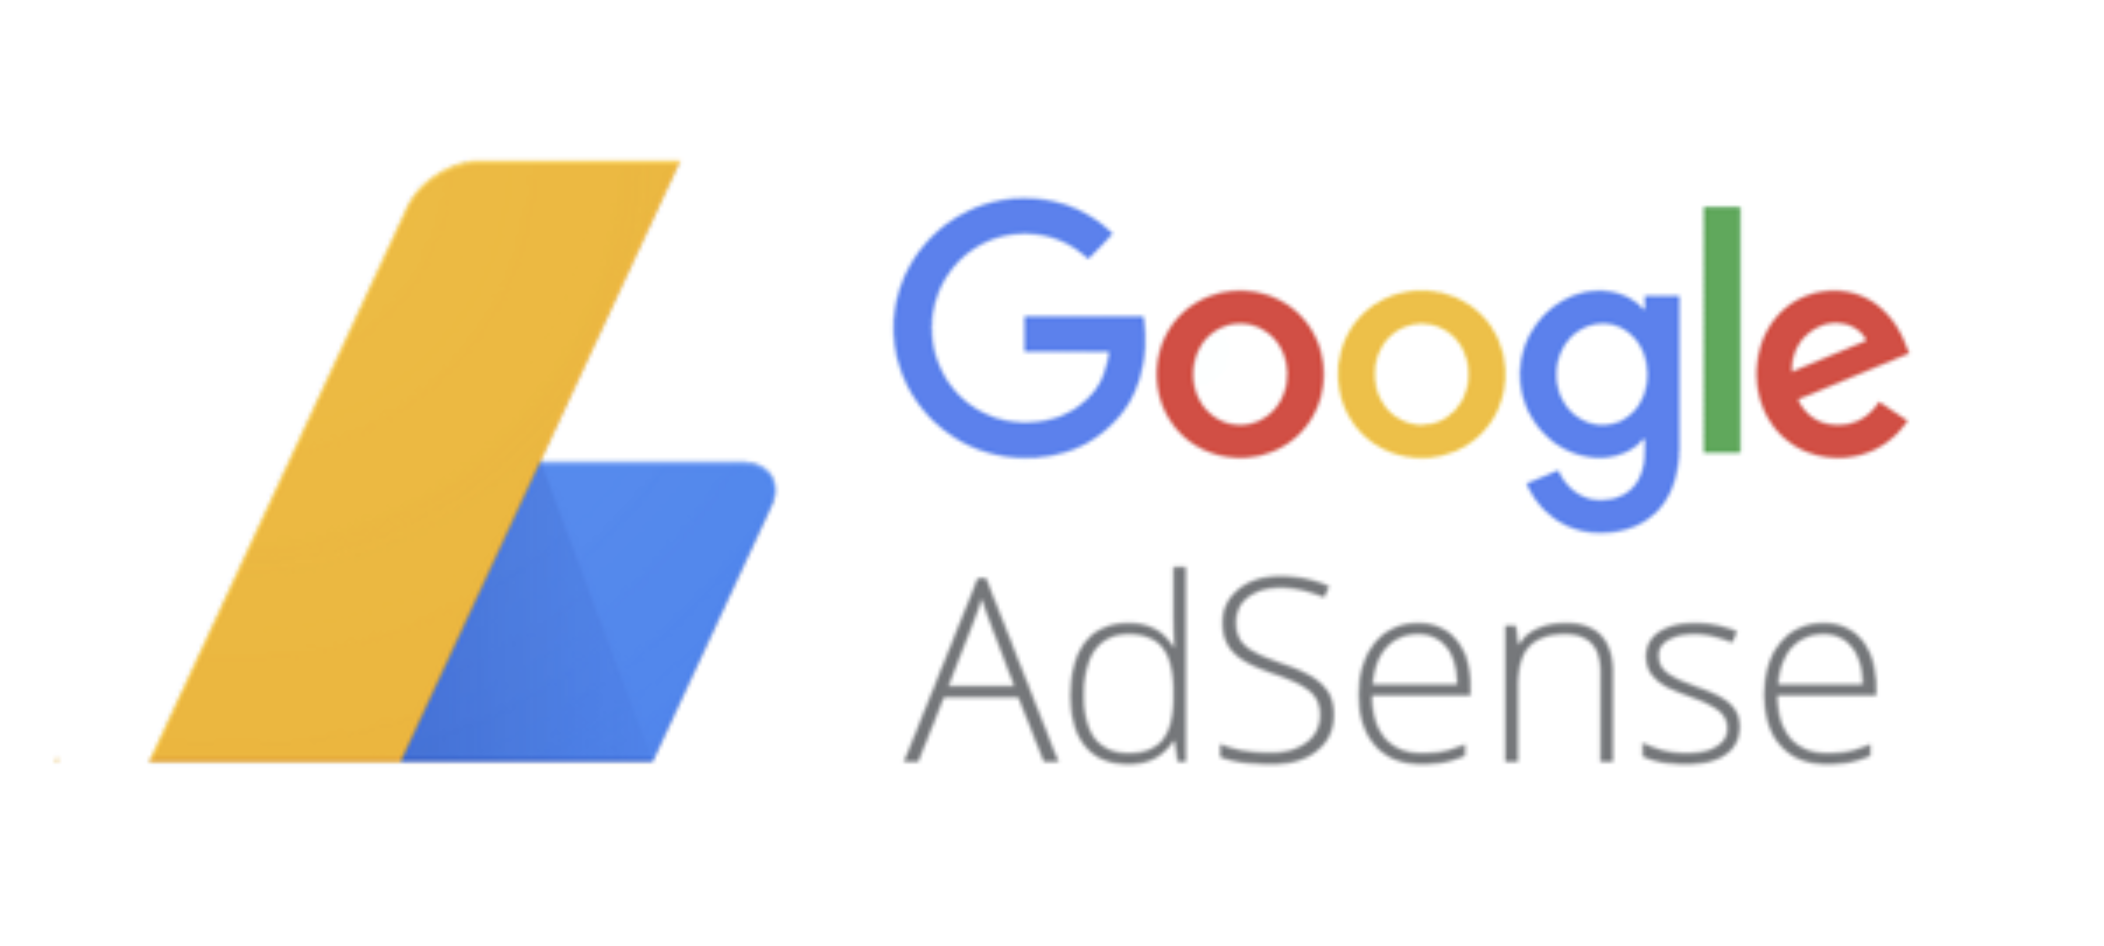 Make Money With your Website by Google Adsense